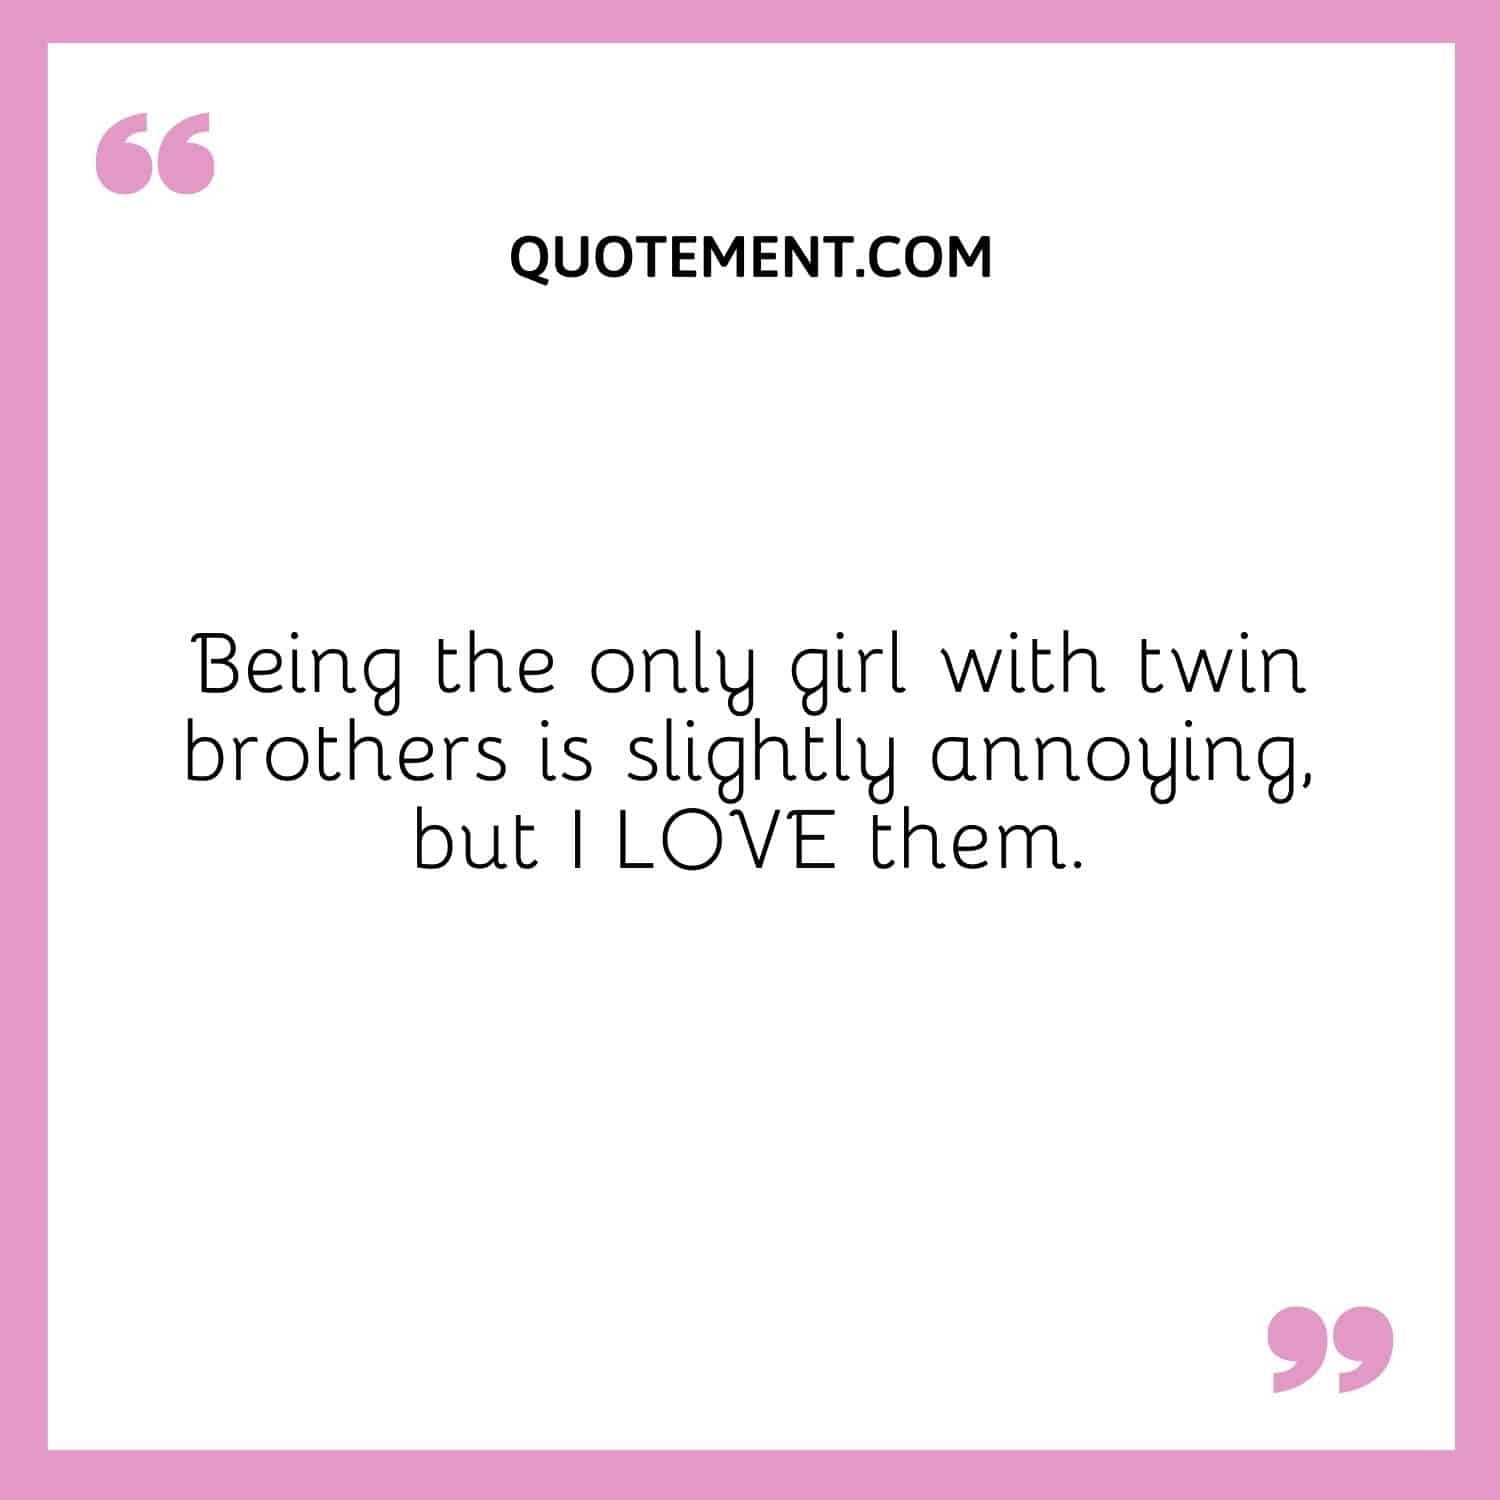 Being the only girl with twin brothers is slightly annoying